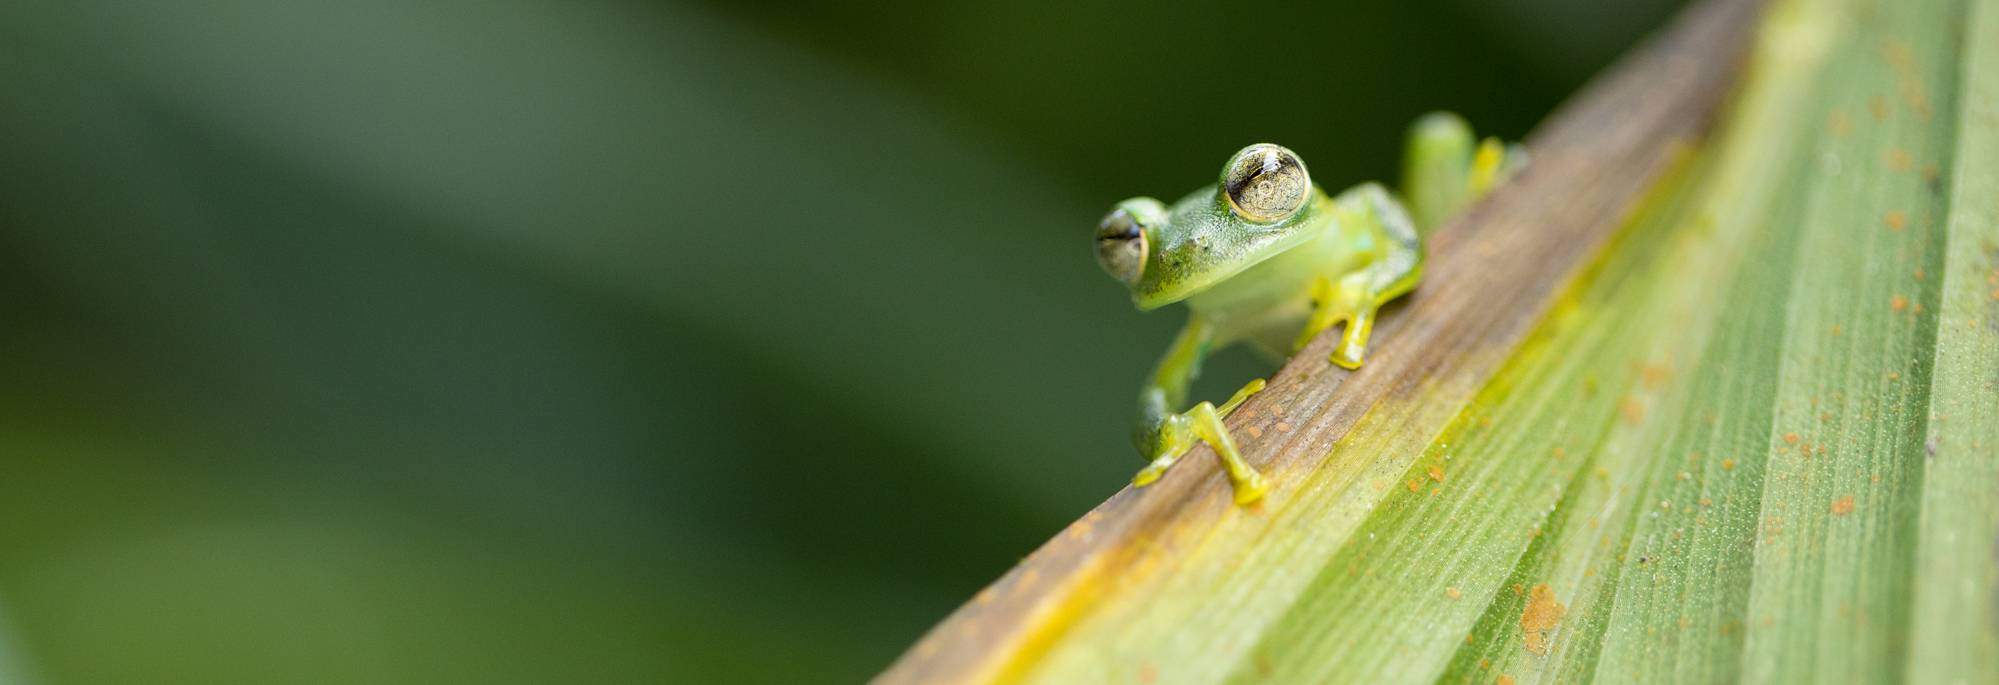 small frog on a leaf